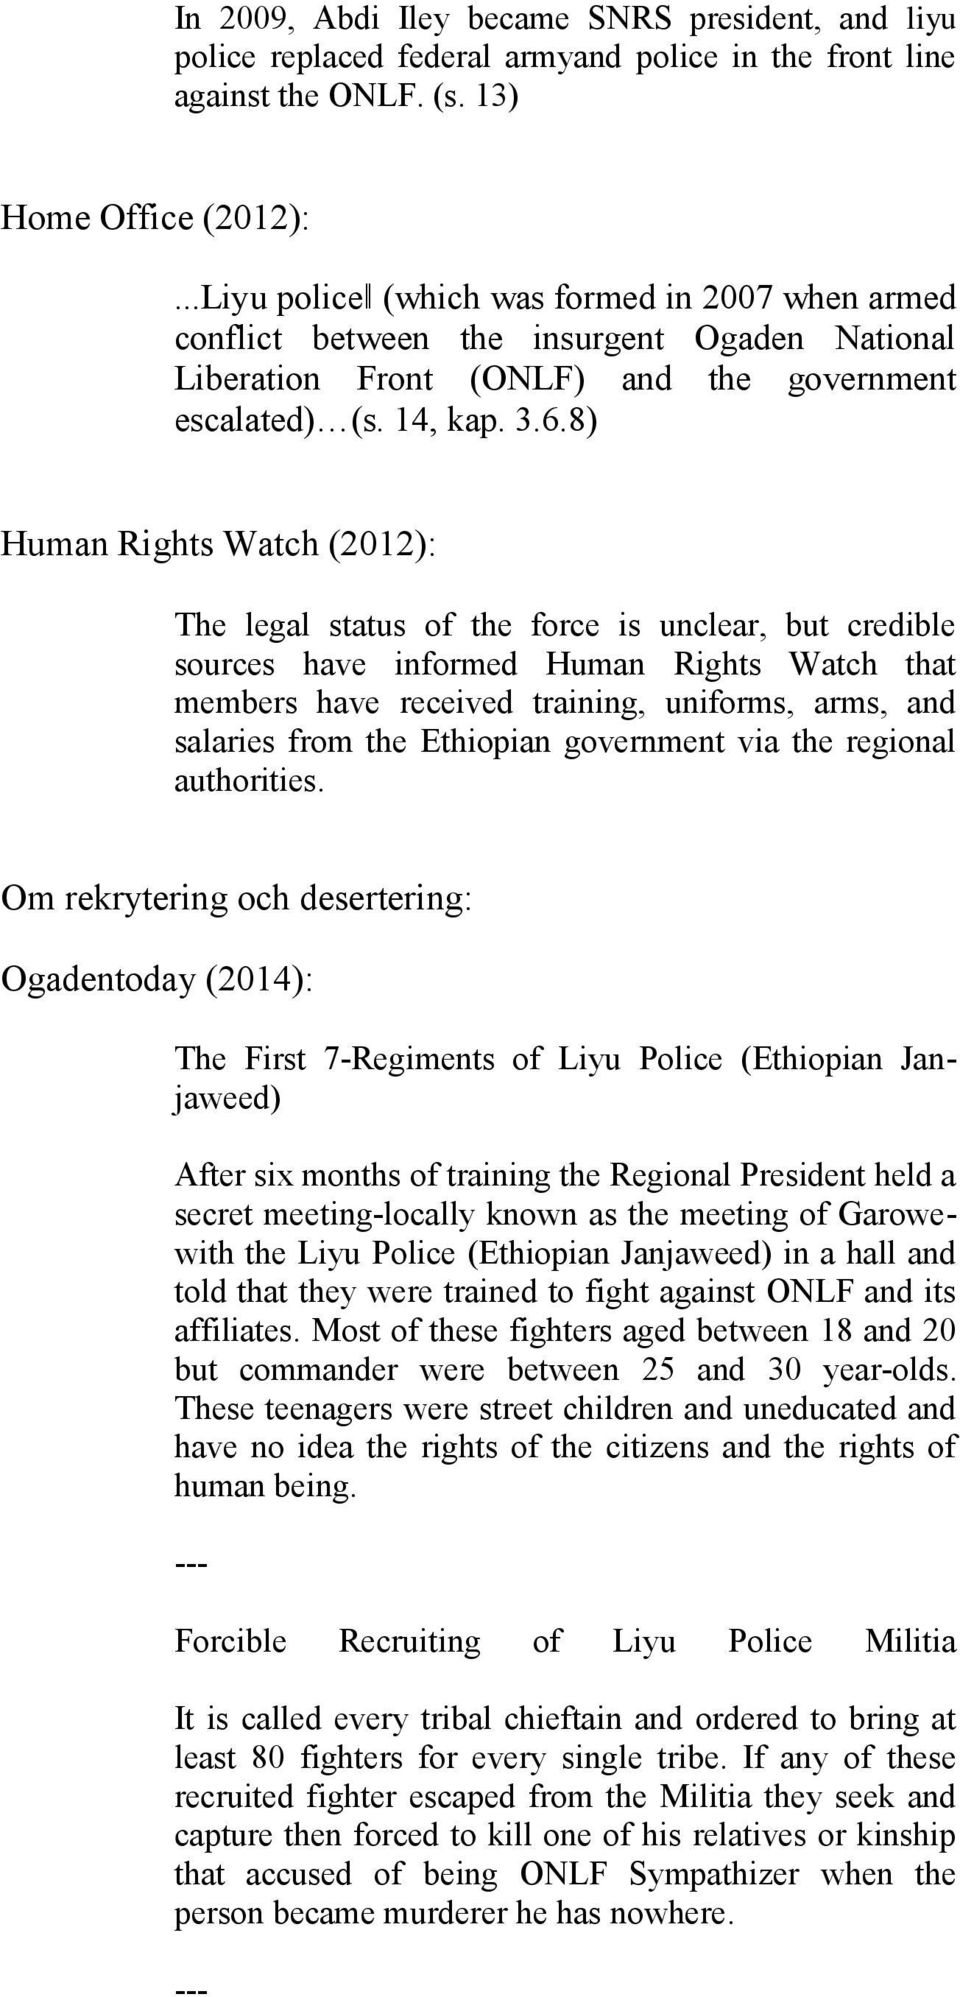 8) Human Rights Watch (2012): The legal status of the force is unclear, but credible sources have informed Human Rights Watch that members have received training, uniforms, arms, and salaries from